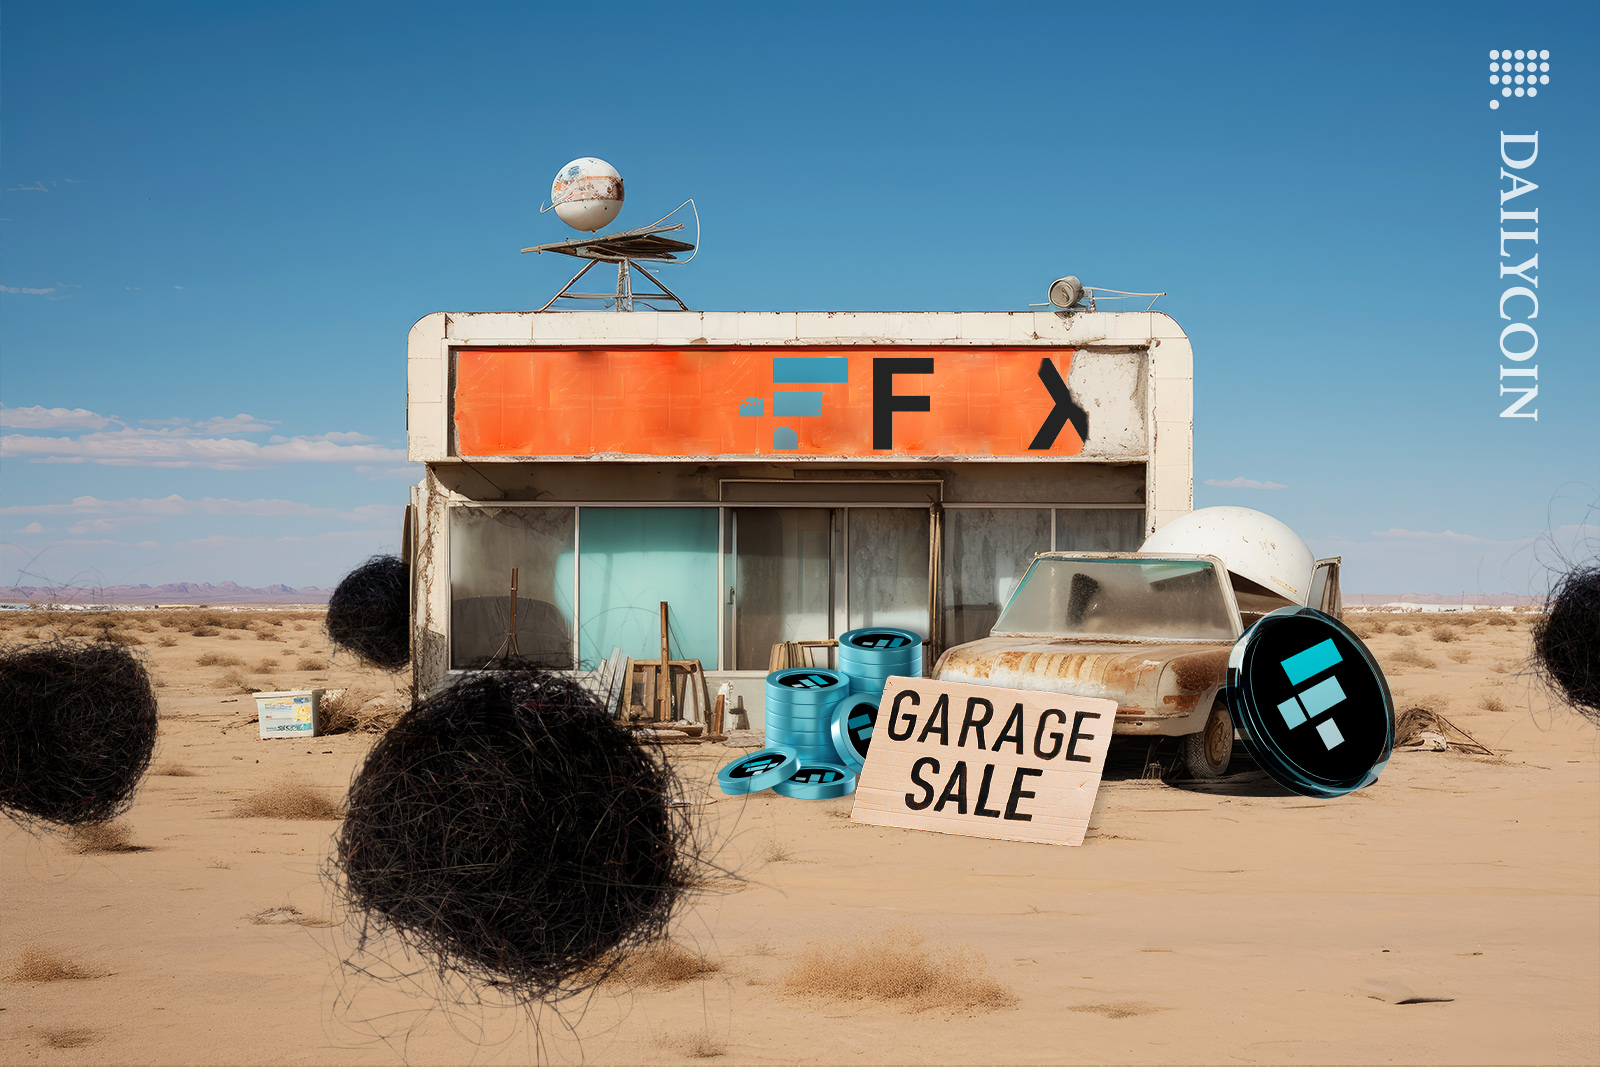 FTX garage sale in the middle of the desert with SBF's hair rolling in the sand like tumbleweed.